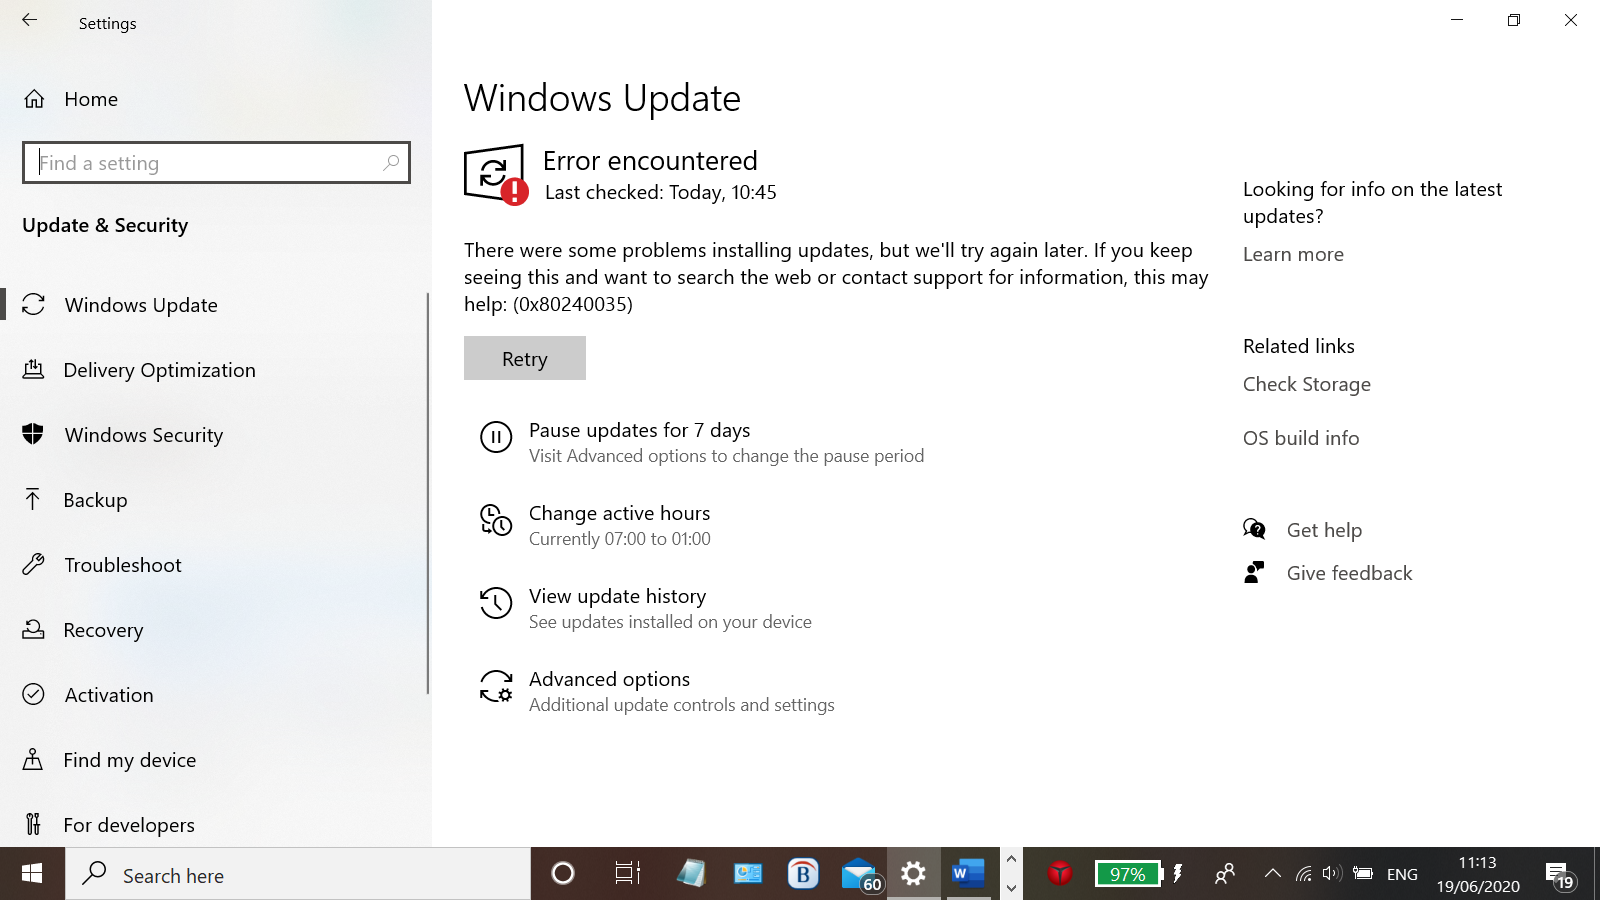 Research shows Windows updates can take six hours to complete